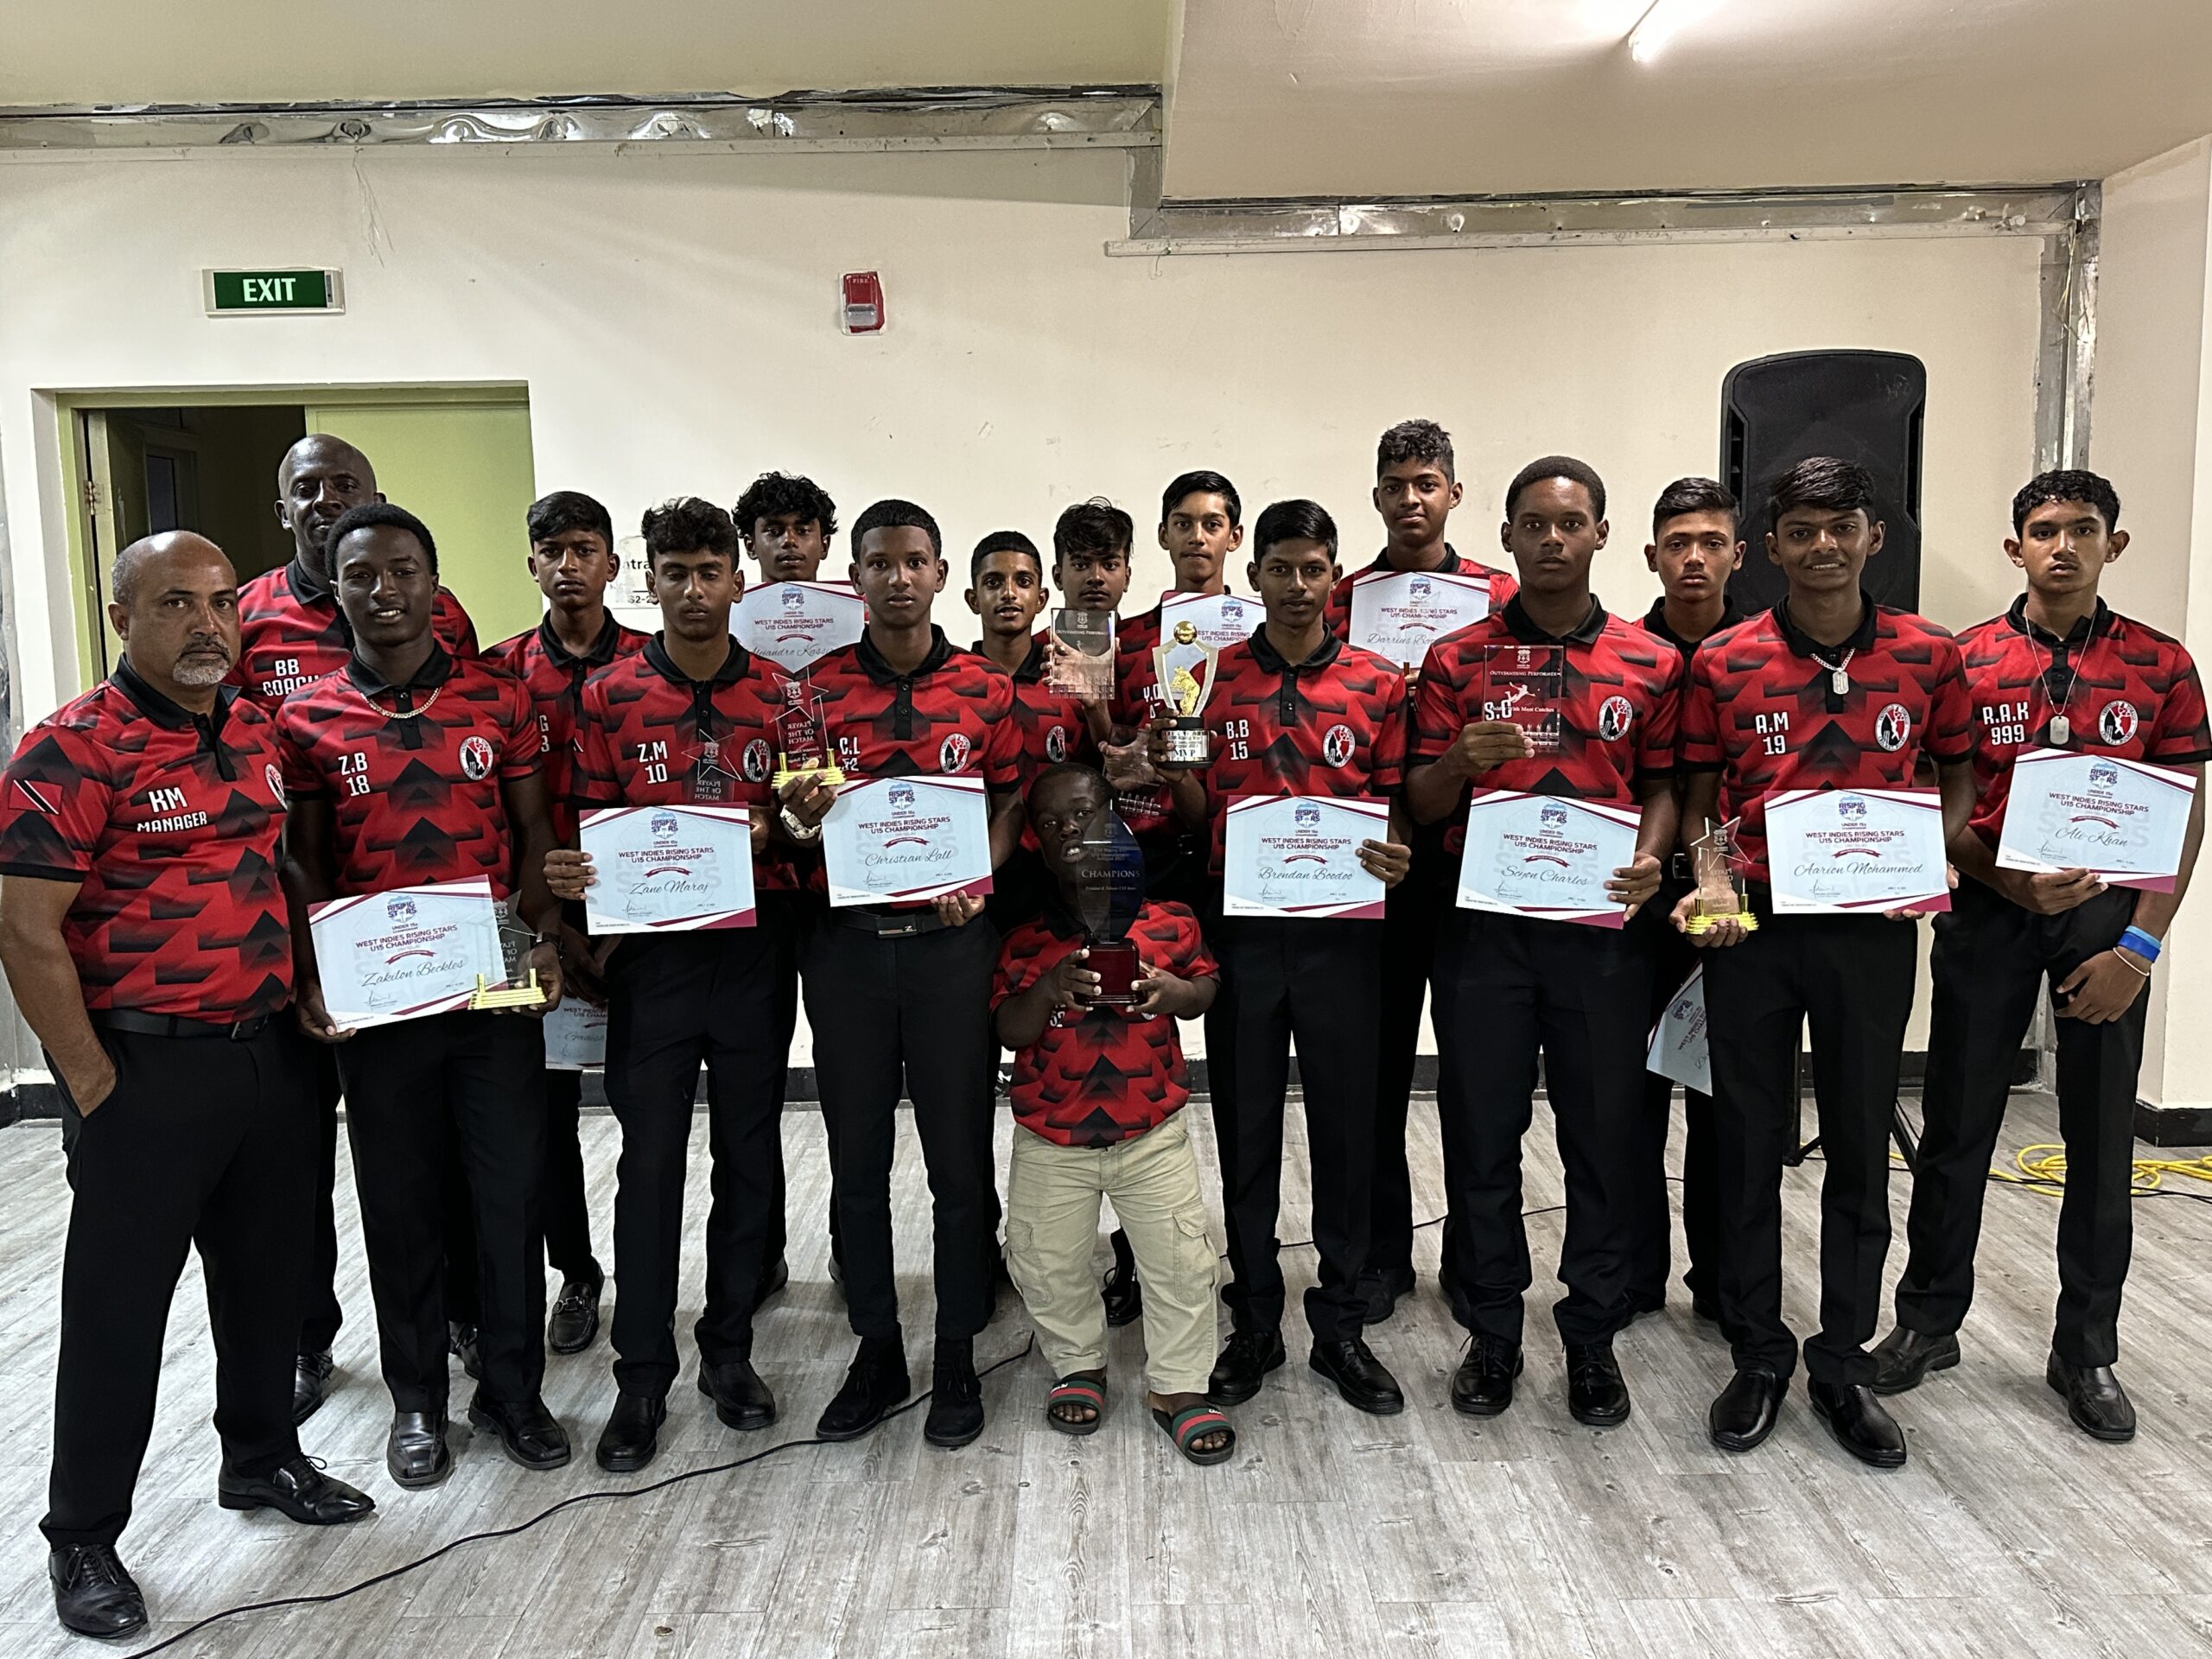 Trinidad and Tobago Crowned West Indies Rising Stars Under 15 Champions